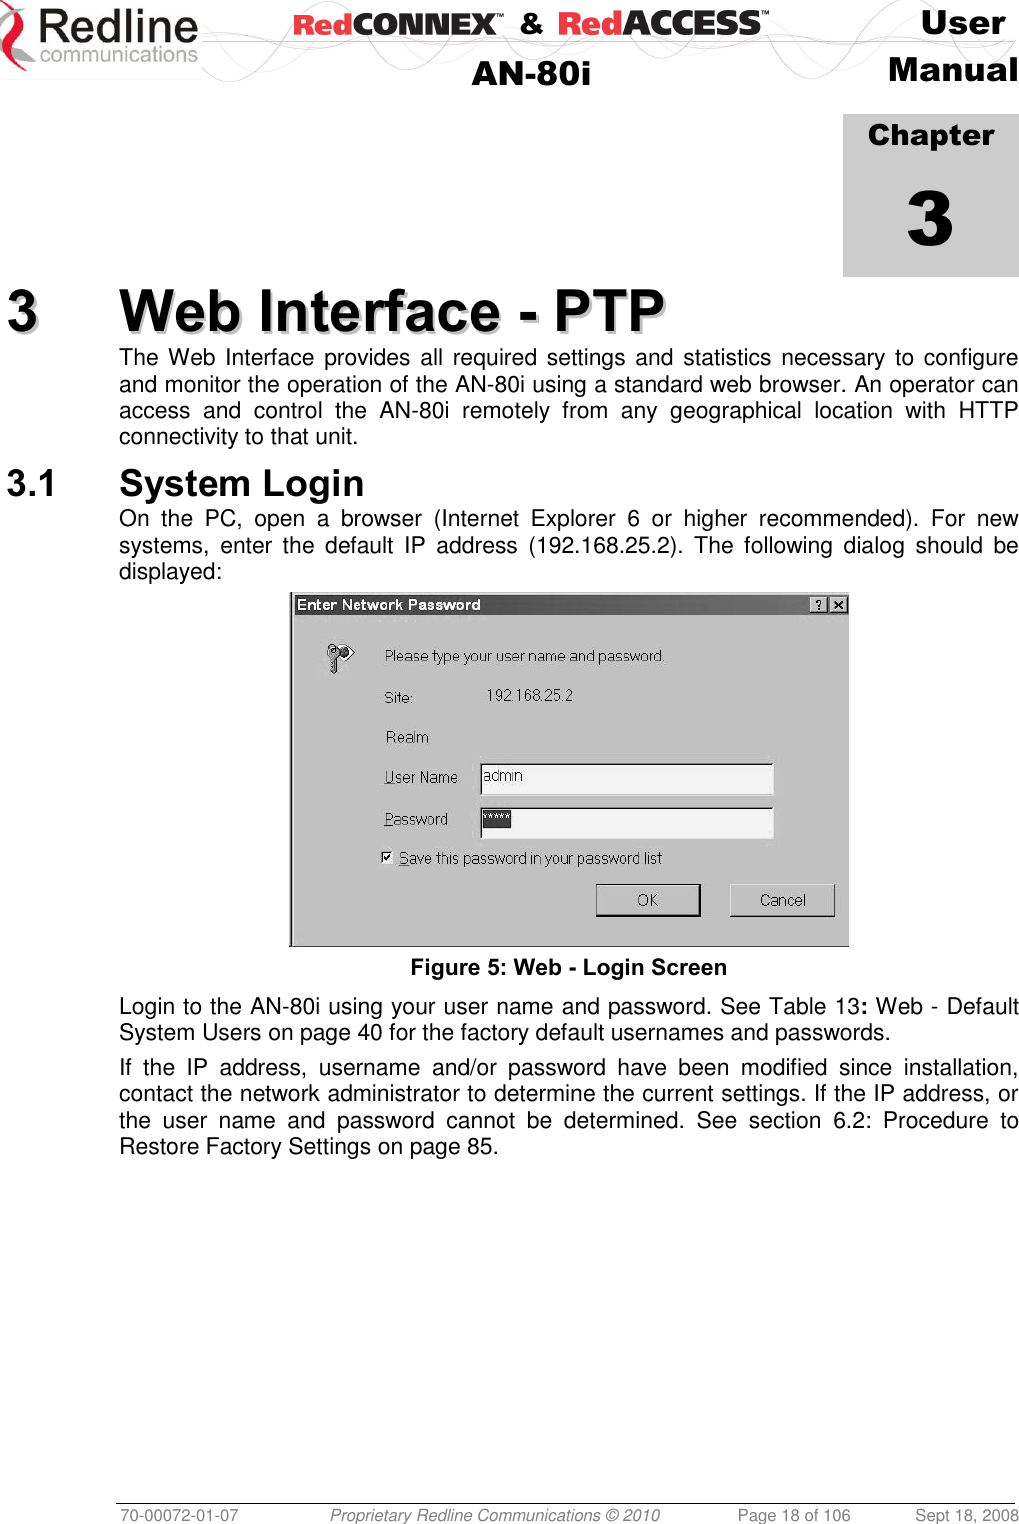    &amp;  User  AN-80i Manual  70-00072-01-07 Proprietary Redline Communications © 2010  Page 18 of 106  Sept 18, 2008            Chapter 3 33  WWeebb  IInntteerrffaaccee  --  PPTTPP  The Web Interface  provides all required  settings and statistics  necessary to configure and monitor the operation of the AN-80i using a standard web browser. An operator can access  and  control  the  AN-80i  remotely  from  any  geographical  location  with  HTTP connectivity to that unit. 3.1 System Login On  the  PC,  open  a  browser  (Internet  Explorer  6  or  higher  recommended).  For  new systems,  enter  the  default  IP  address  (192.168.25.2). The  following  dialog  should  be displayed:  Figure 5: Web - Login Screen Login to the AN-80i using your user name and password. See Table 13: Web - Default System Users on page 40 for the factory default usernames and passwords. If  the  IP  address,  username  and/or  password  have  been  modified  since  installation, contact the network administrator to determine the current settings. If the IP address, or the  user  name  and  password  cannot  be  determined.  See  section  6.2:  Procedure  to Restore Factory Settings on page 85. 